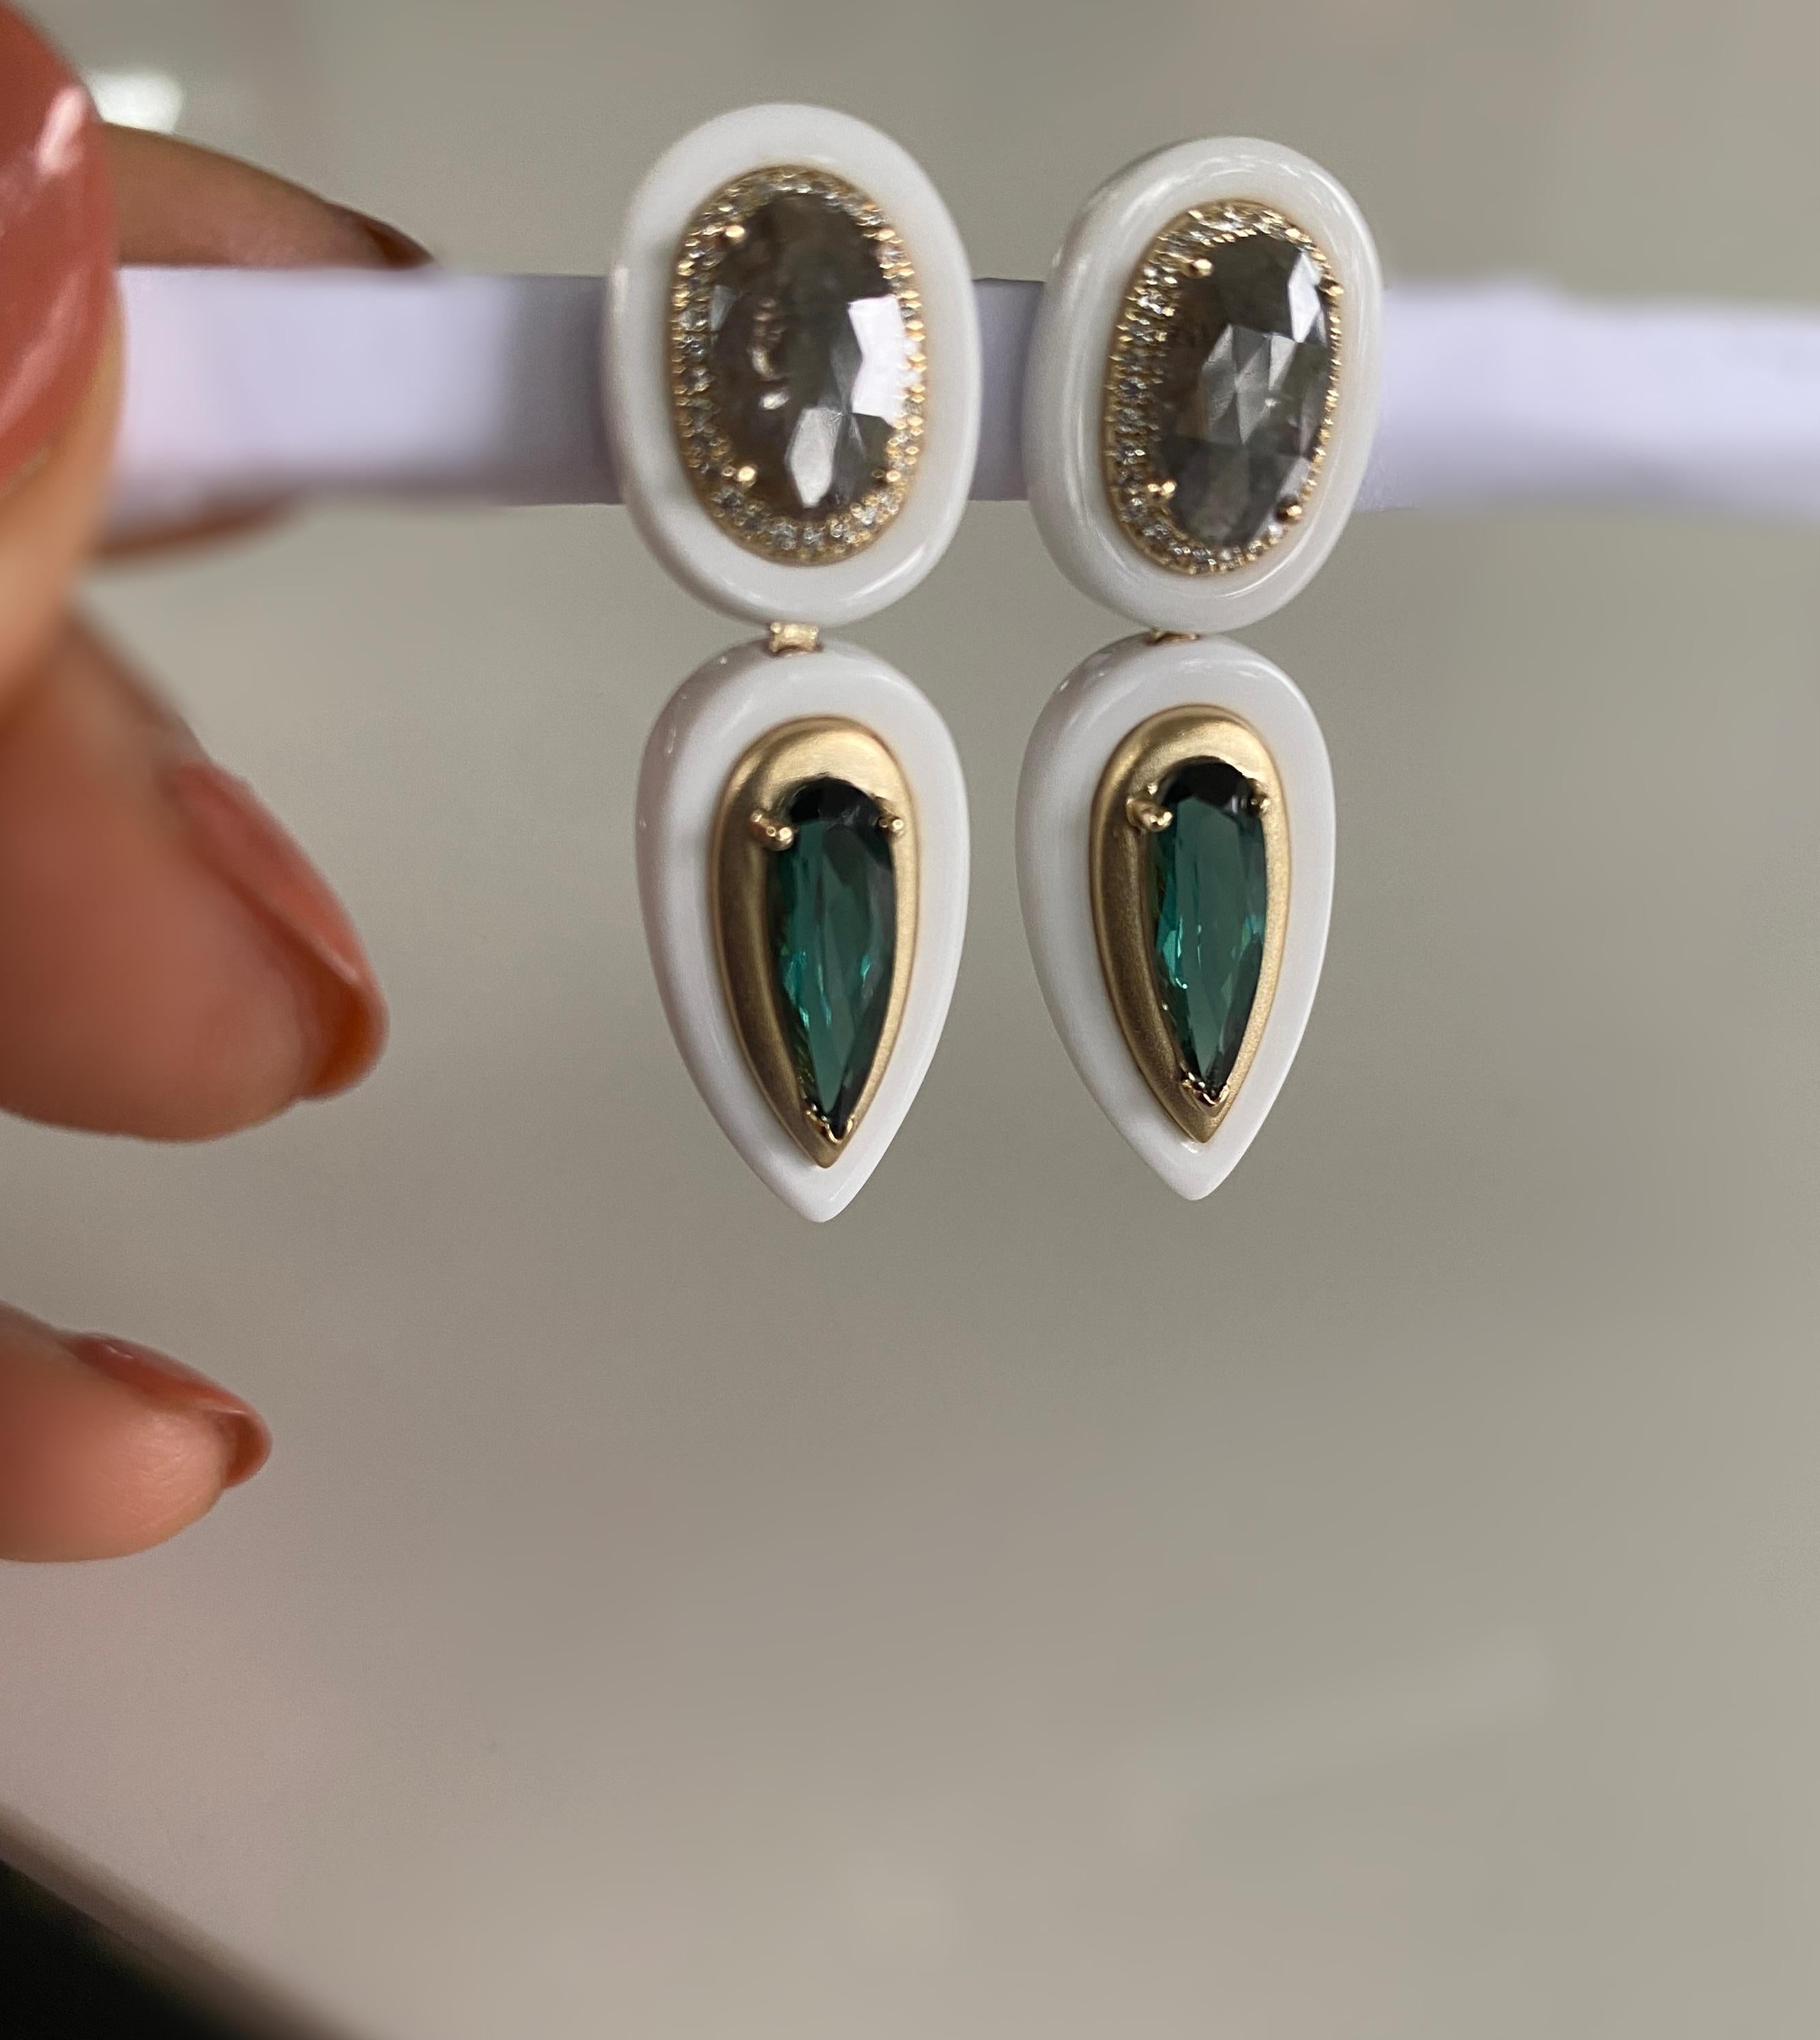 Large Diamond Slices, Indicolite Tourmaline inlaid in White Onyx Earrings In New Condition For Sale In Houston, TX